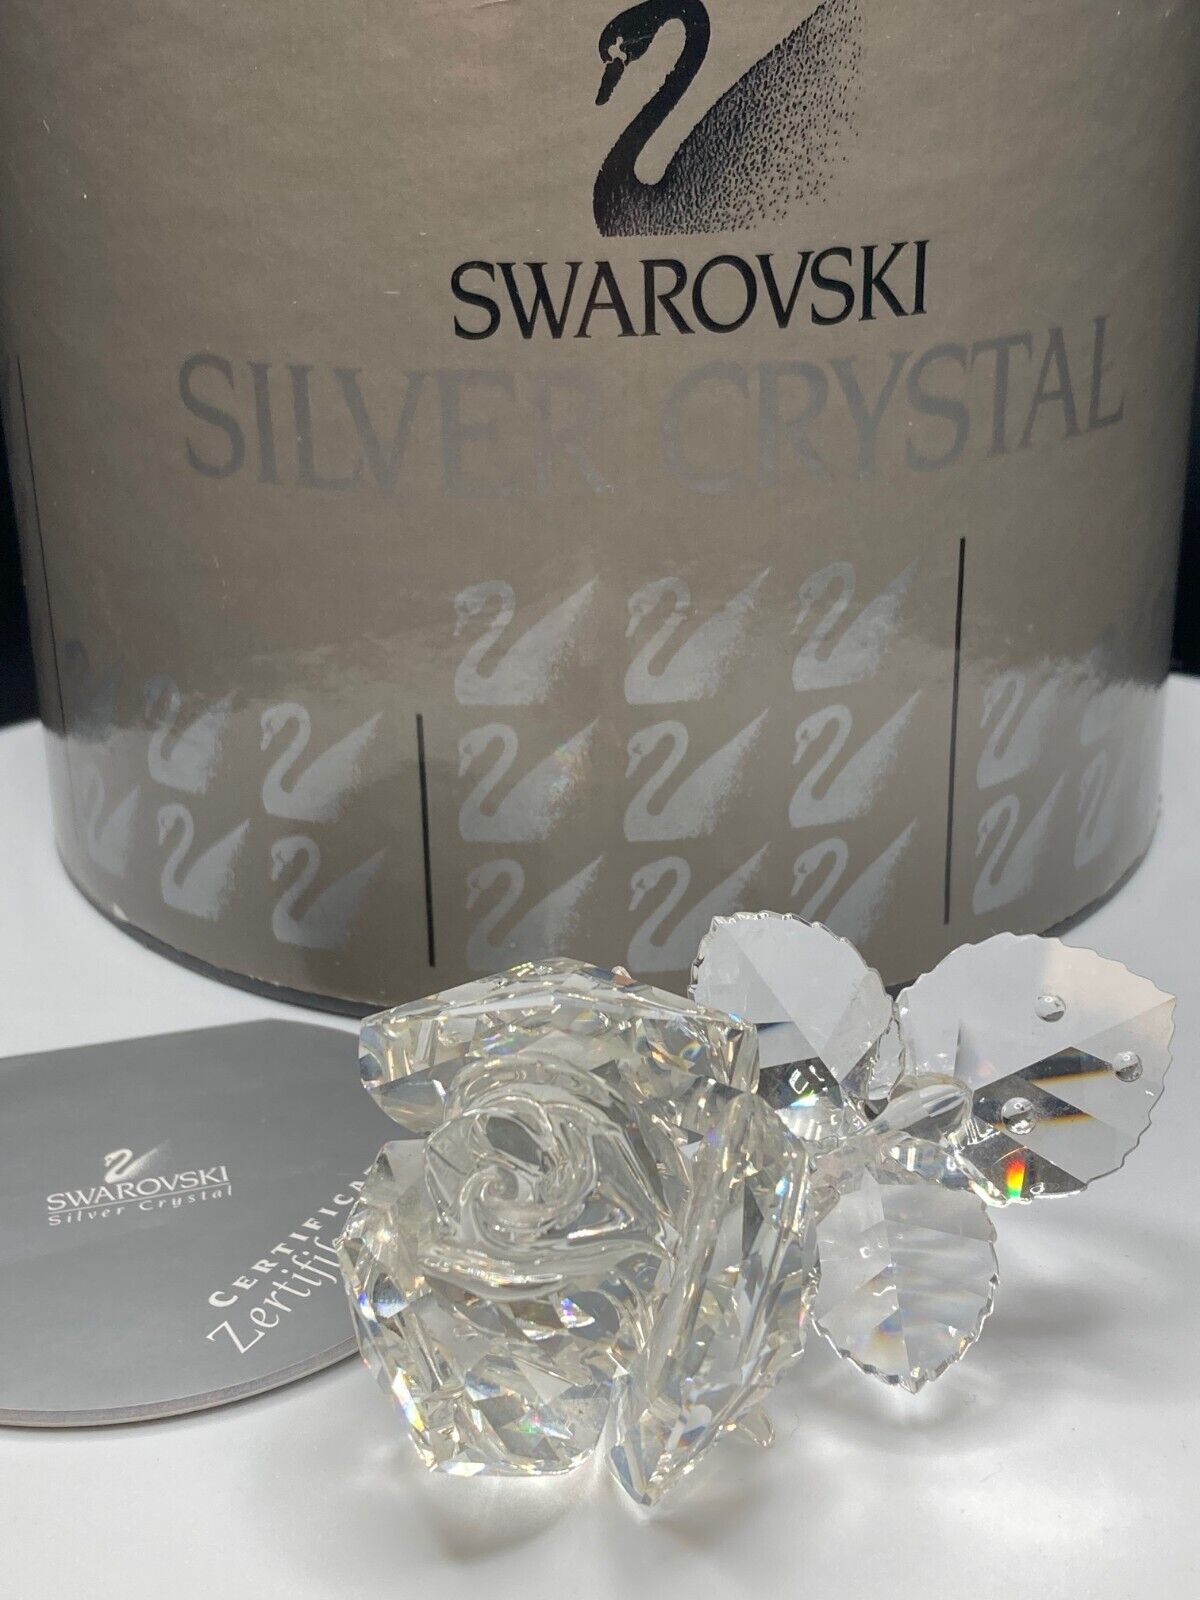 Swarovski Crystal 7478 000 001 The Rose 174956 In Box With Certificate